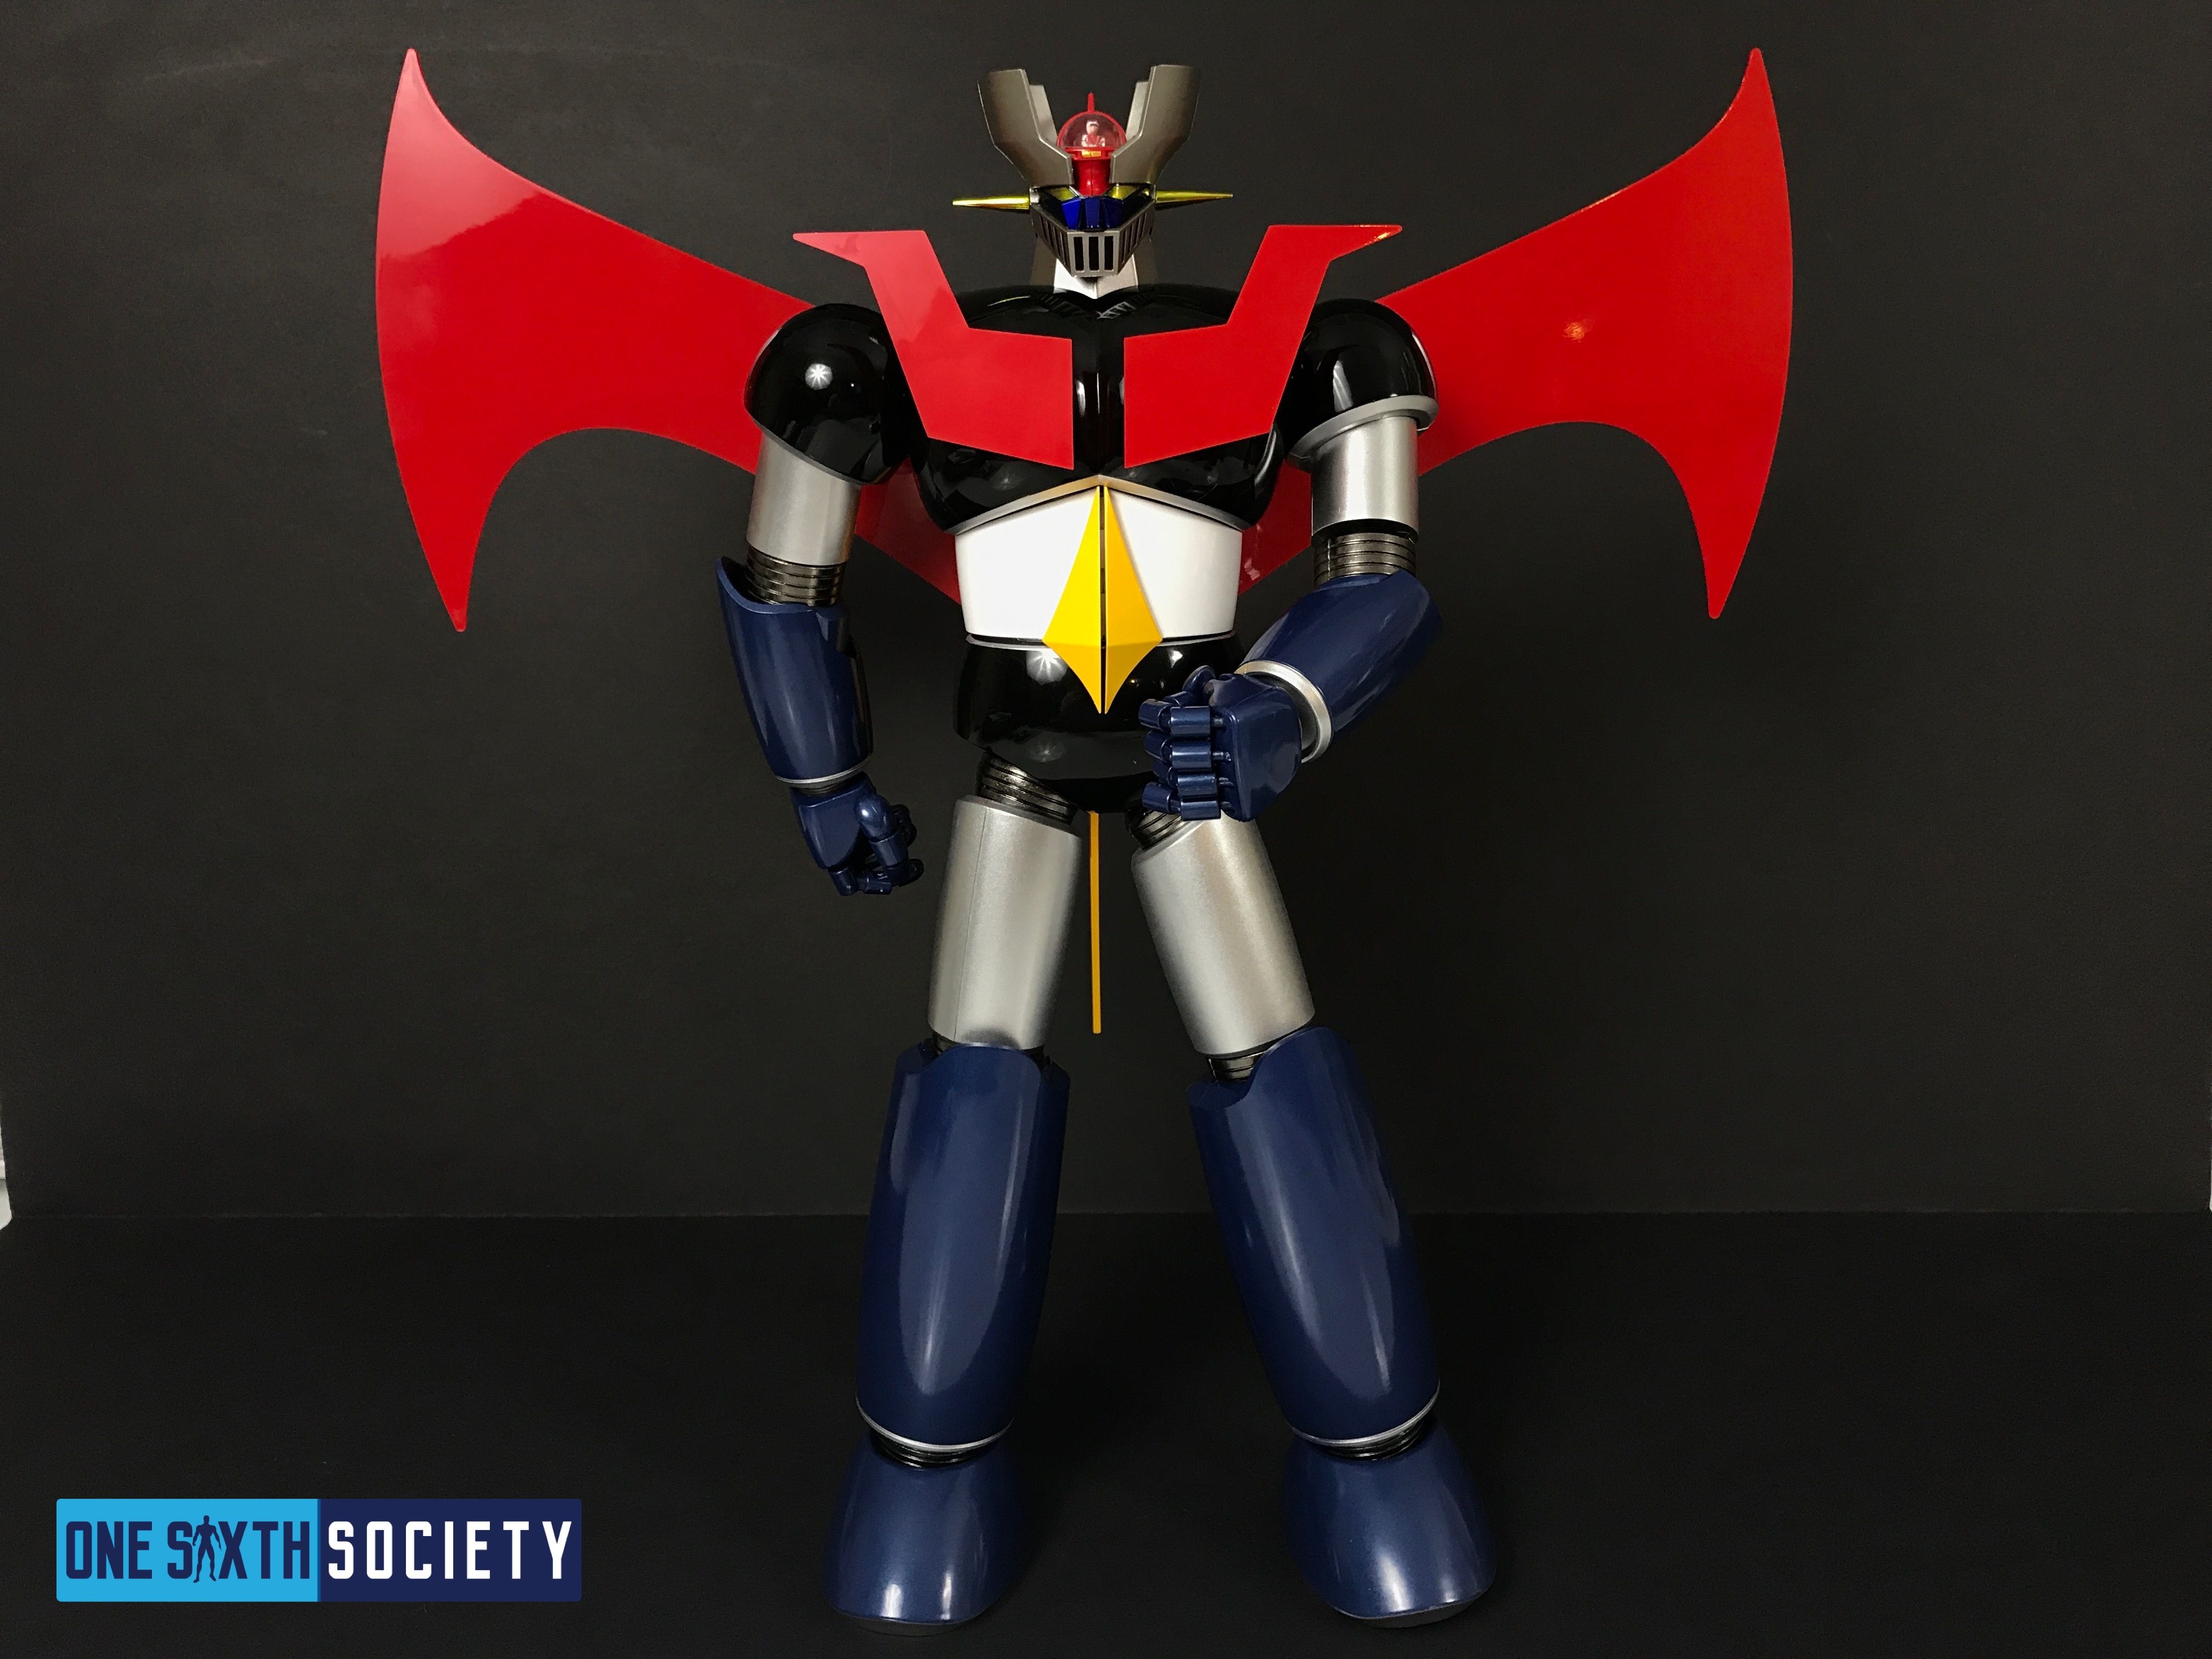 The Future Quest Mazinger Z Figure has Great Articulation